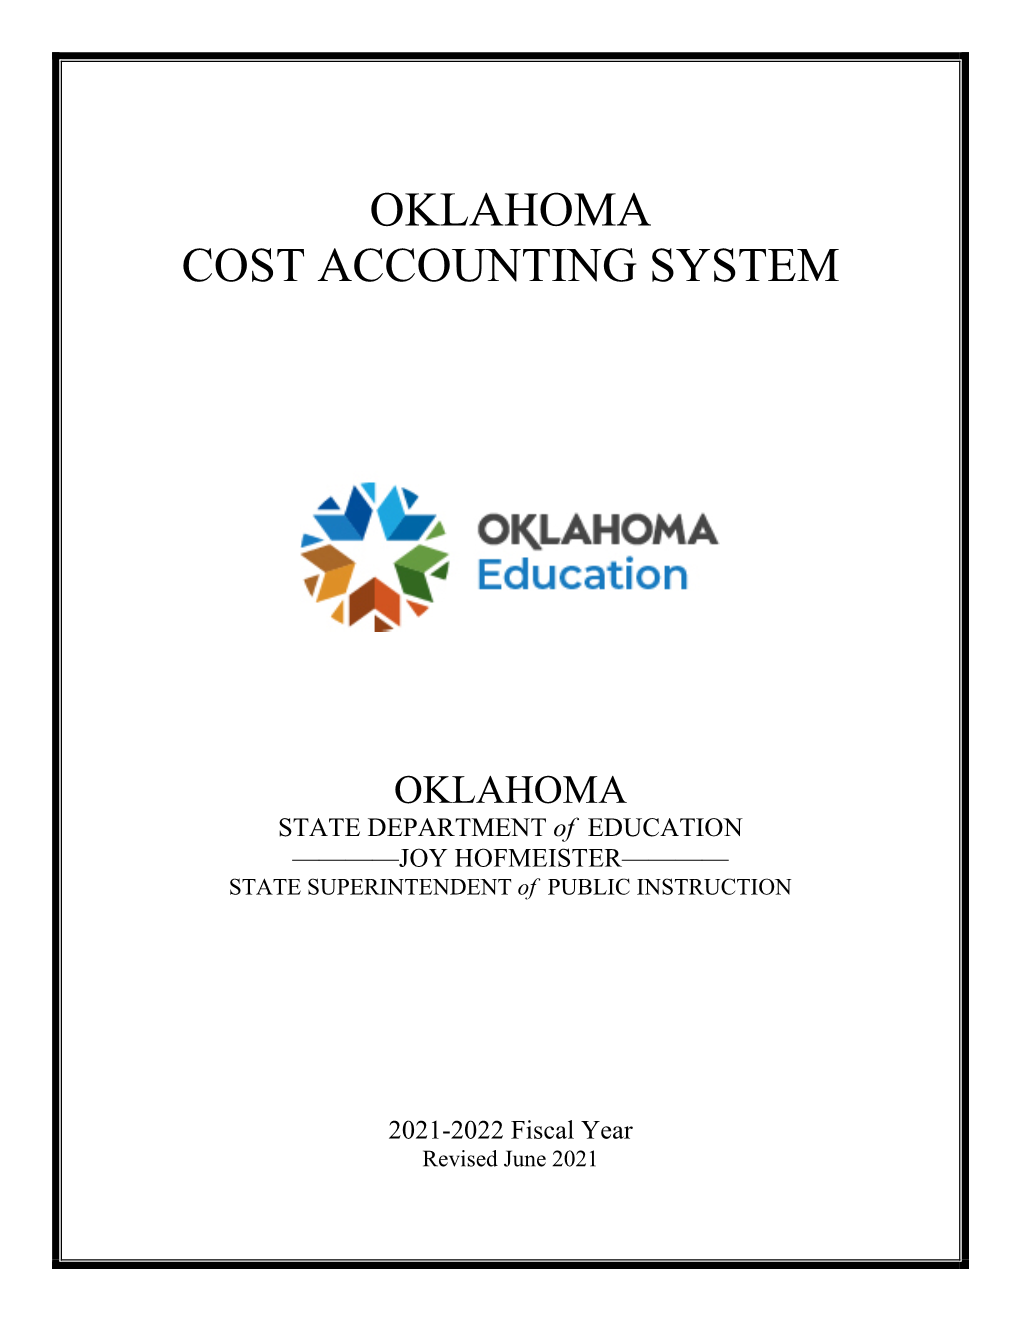 Oklahoma Cost Accounting System